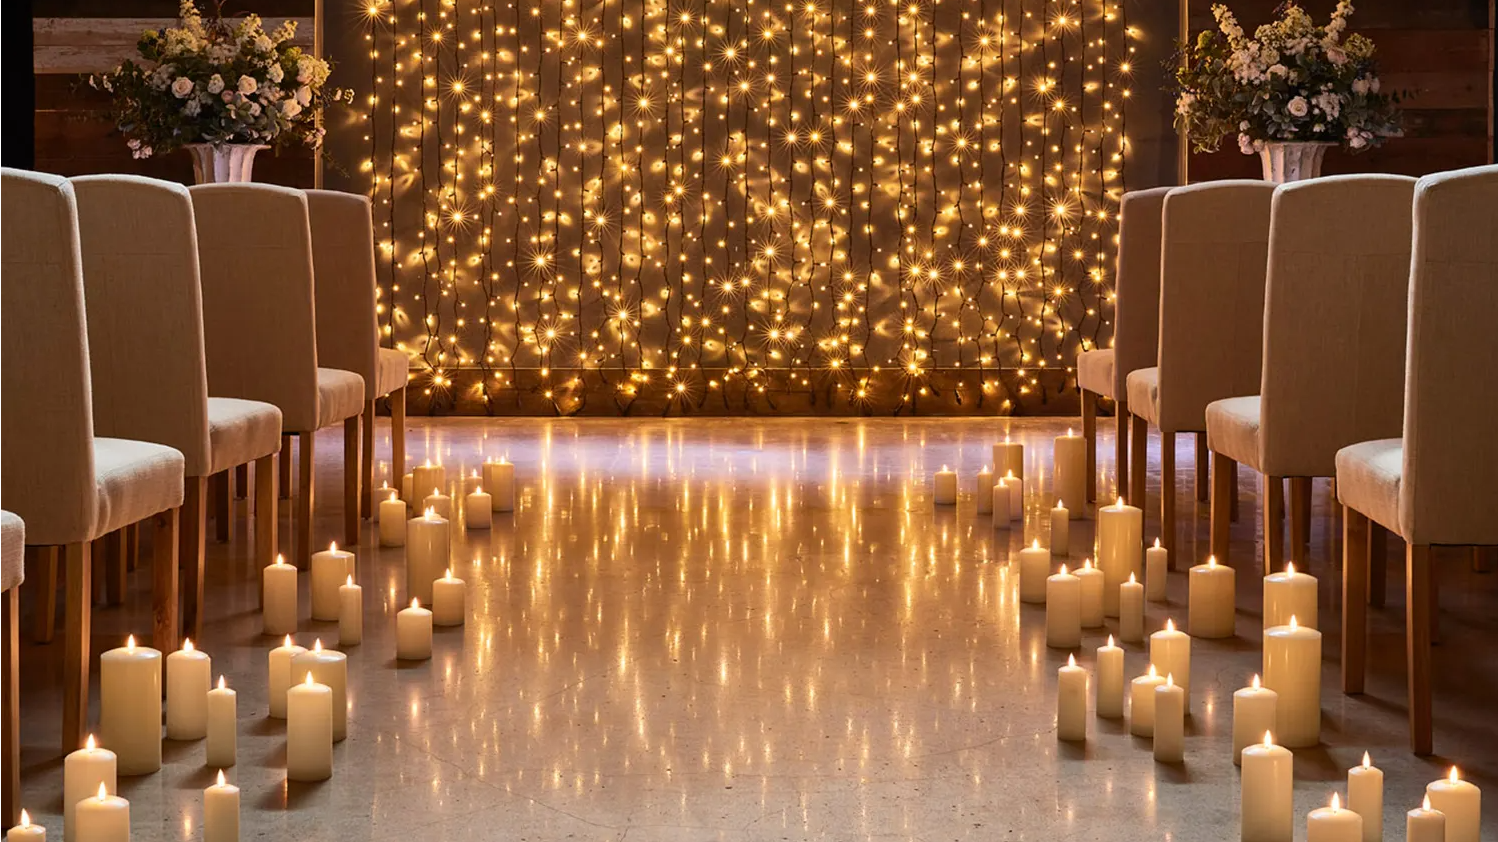 Wedding aisle lined with candles and curtain light illuminating the alter as a backdrop